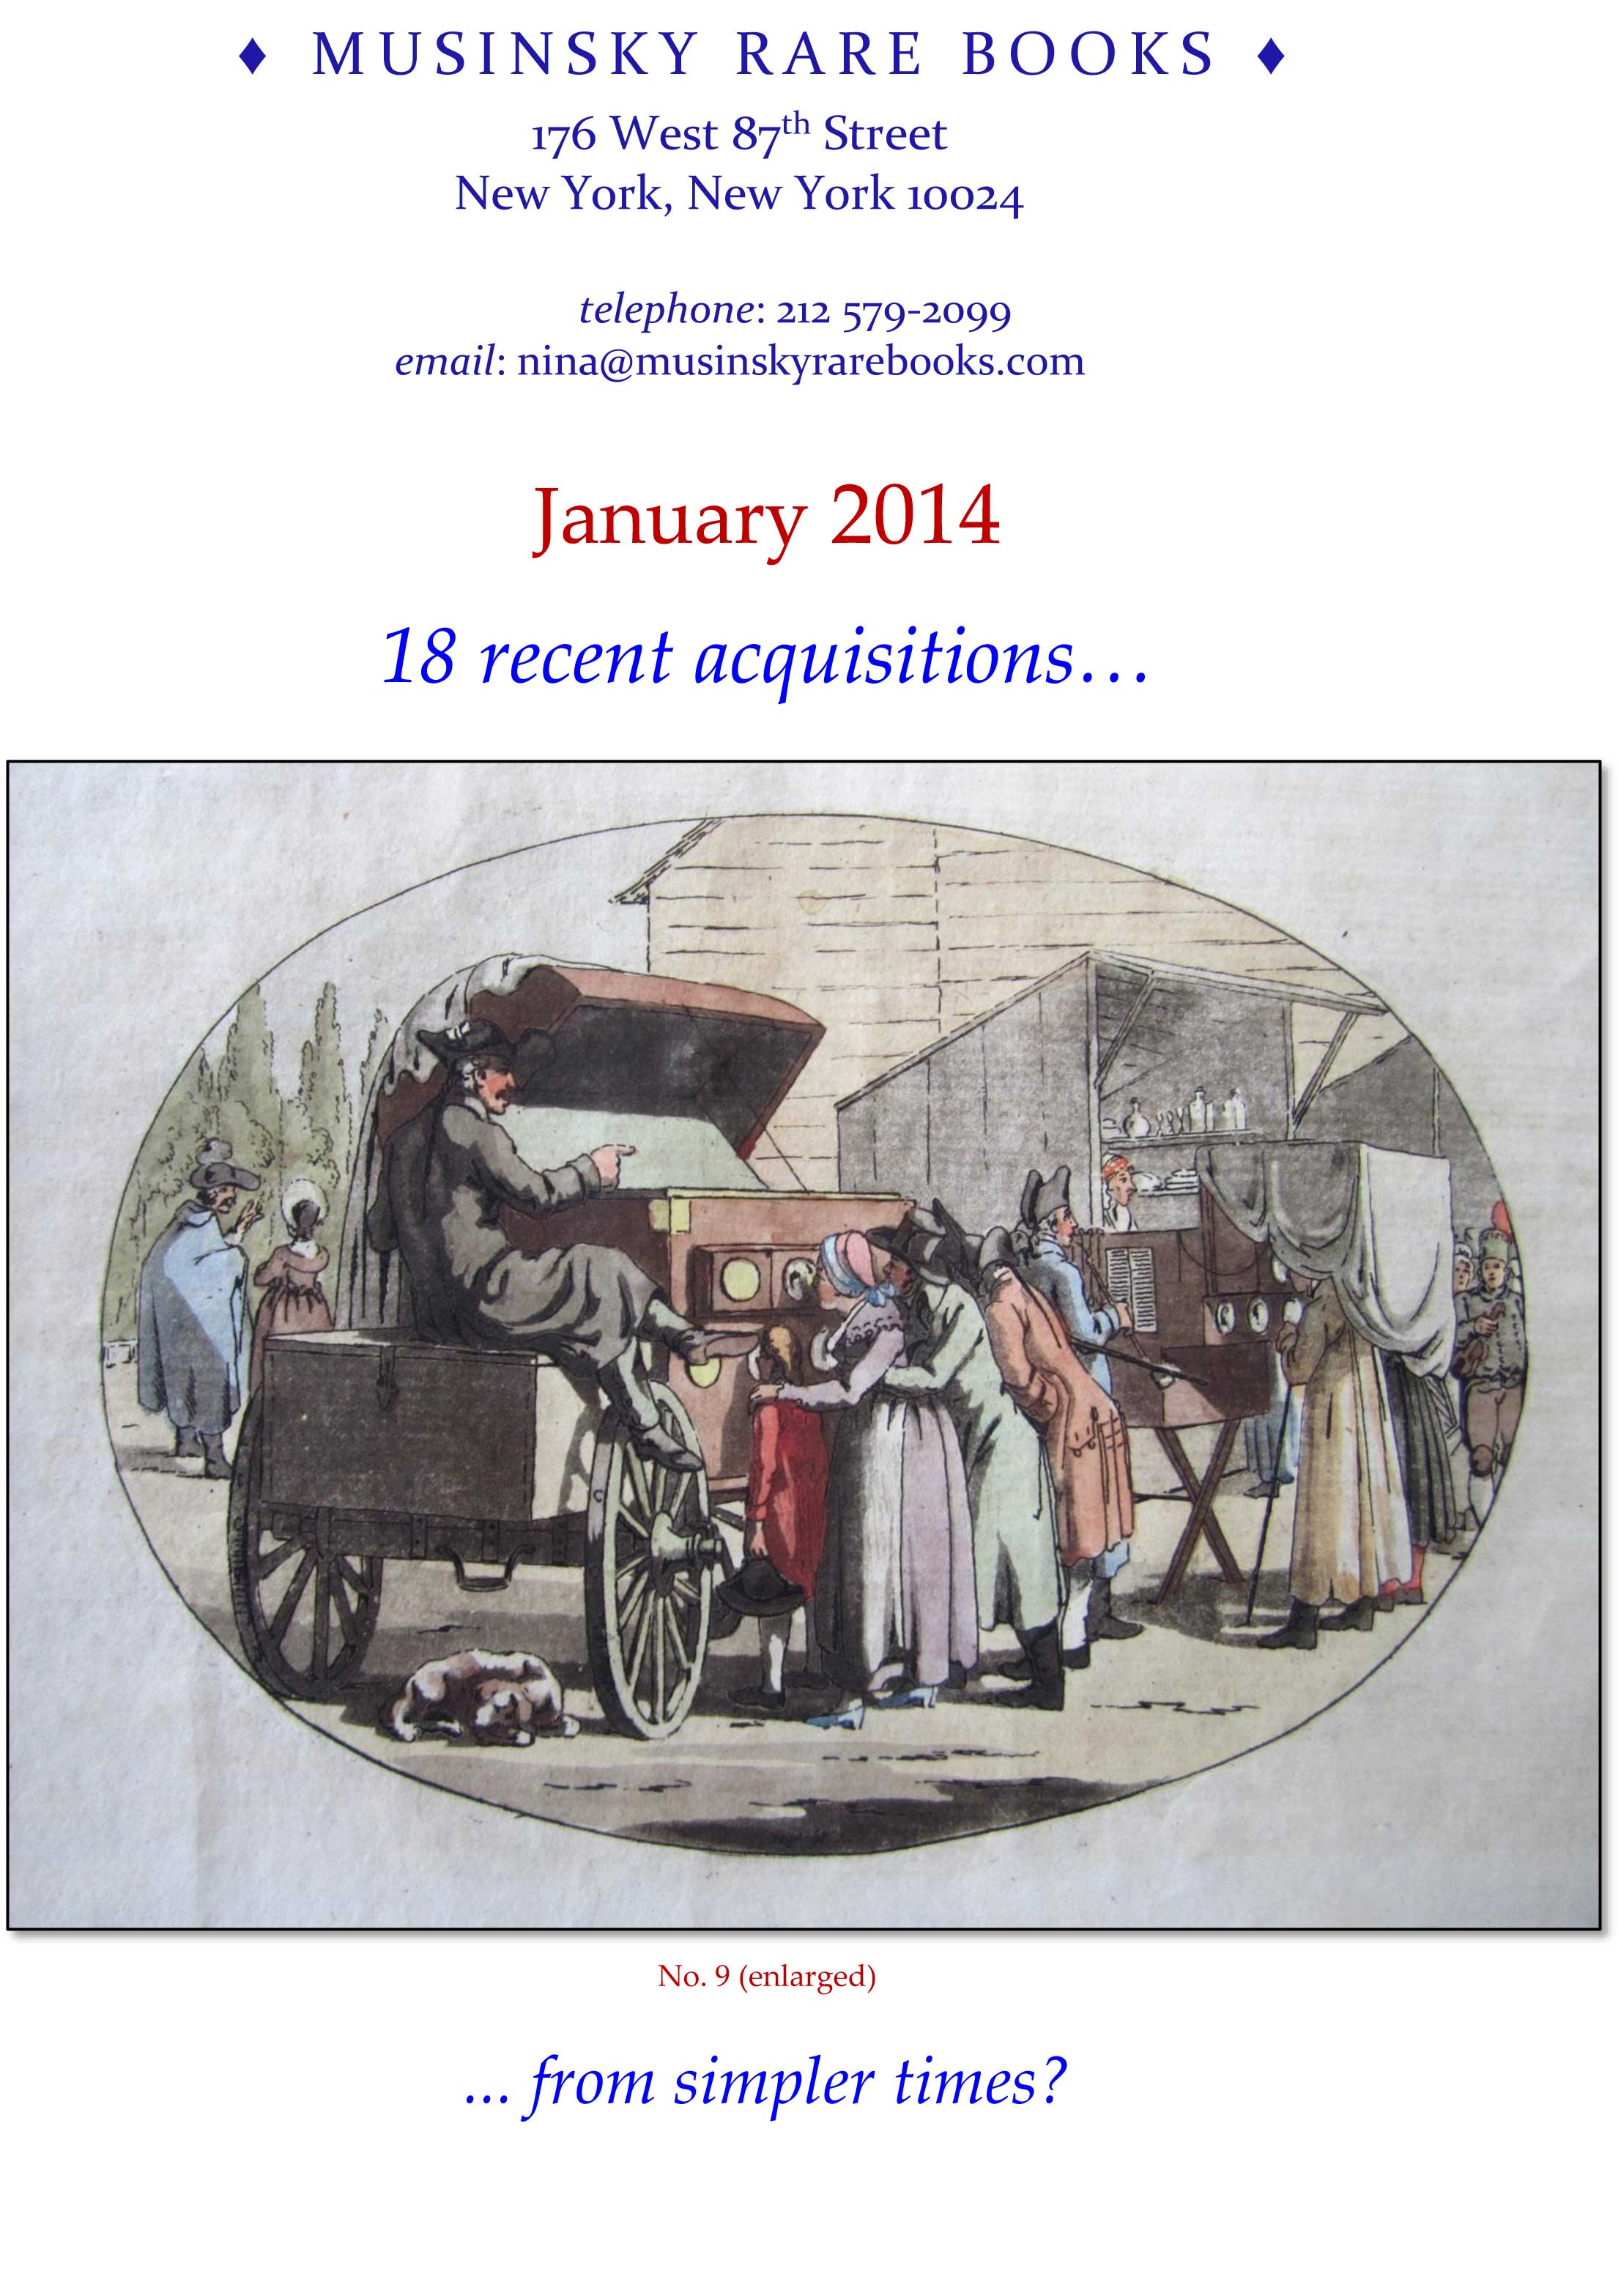 January 2014 - 18 recent acquisitions…